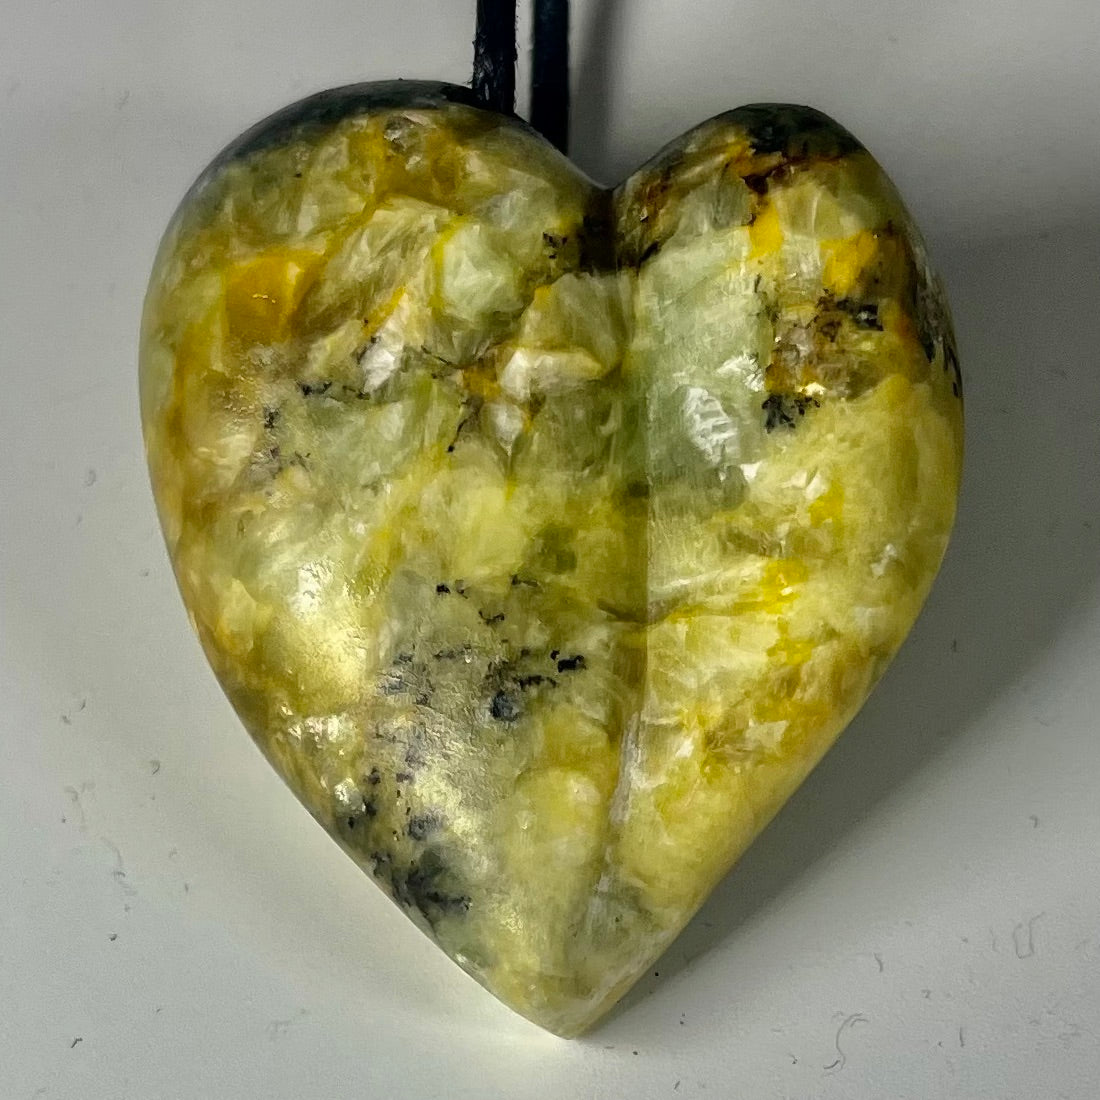 This pendant art class stole our heart. The design and color of the stone is beautiful. Made in Whistler at Fathom Stone Art classes for kids and adults.